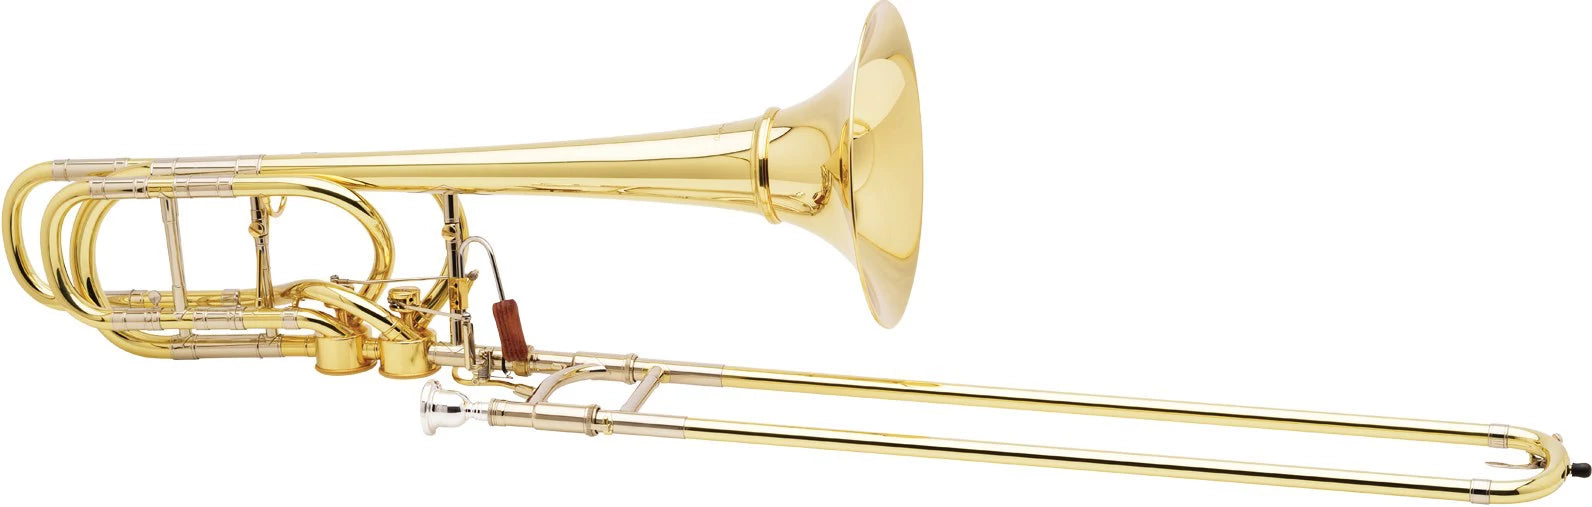 Courtois 'Creation NEW YORK' Bass trombone, Bb/F/Gb or G/D or Eb.  With removable second tuningslide to tune G or Gb.  Brass outer slide with nickel silver sleeves.  Dual bore (0.562""/0.578"").  Yellow brass Fixed 9,49"" bell, Outfit..